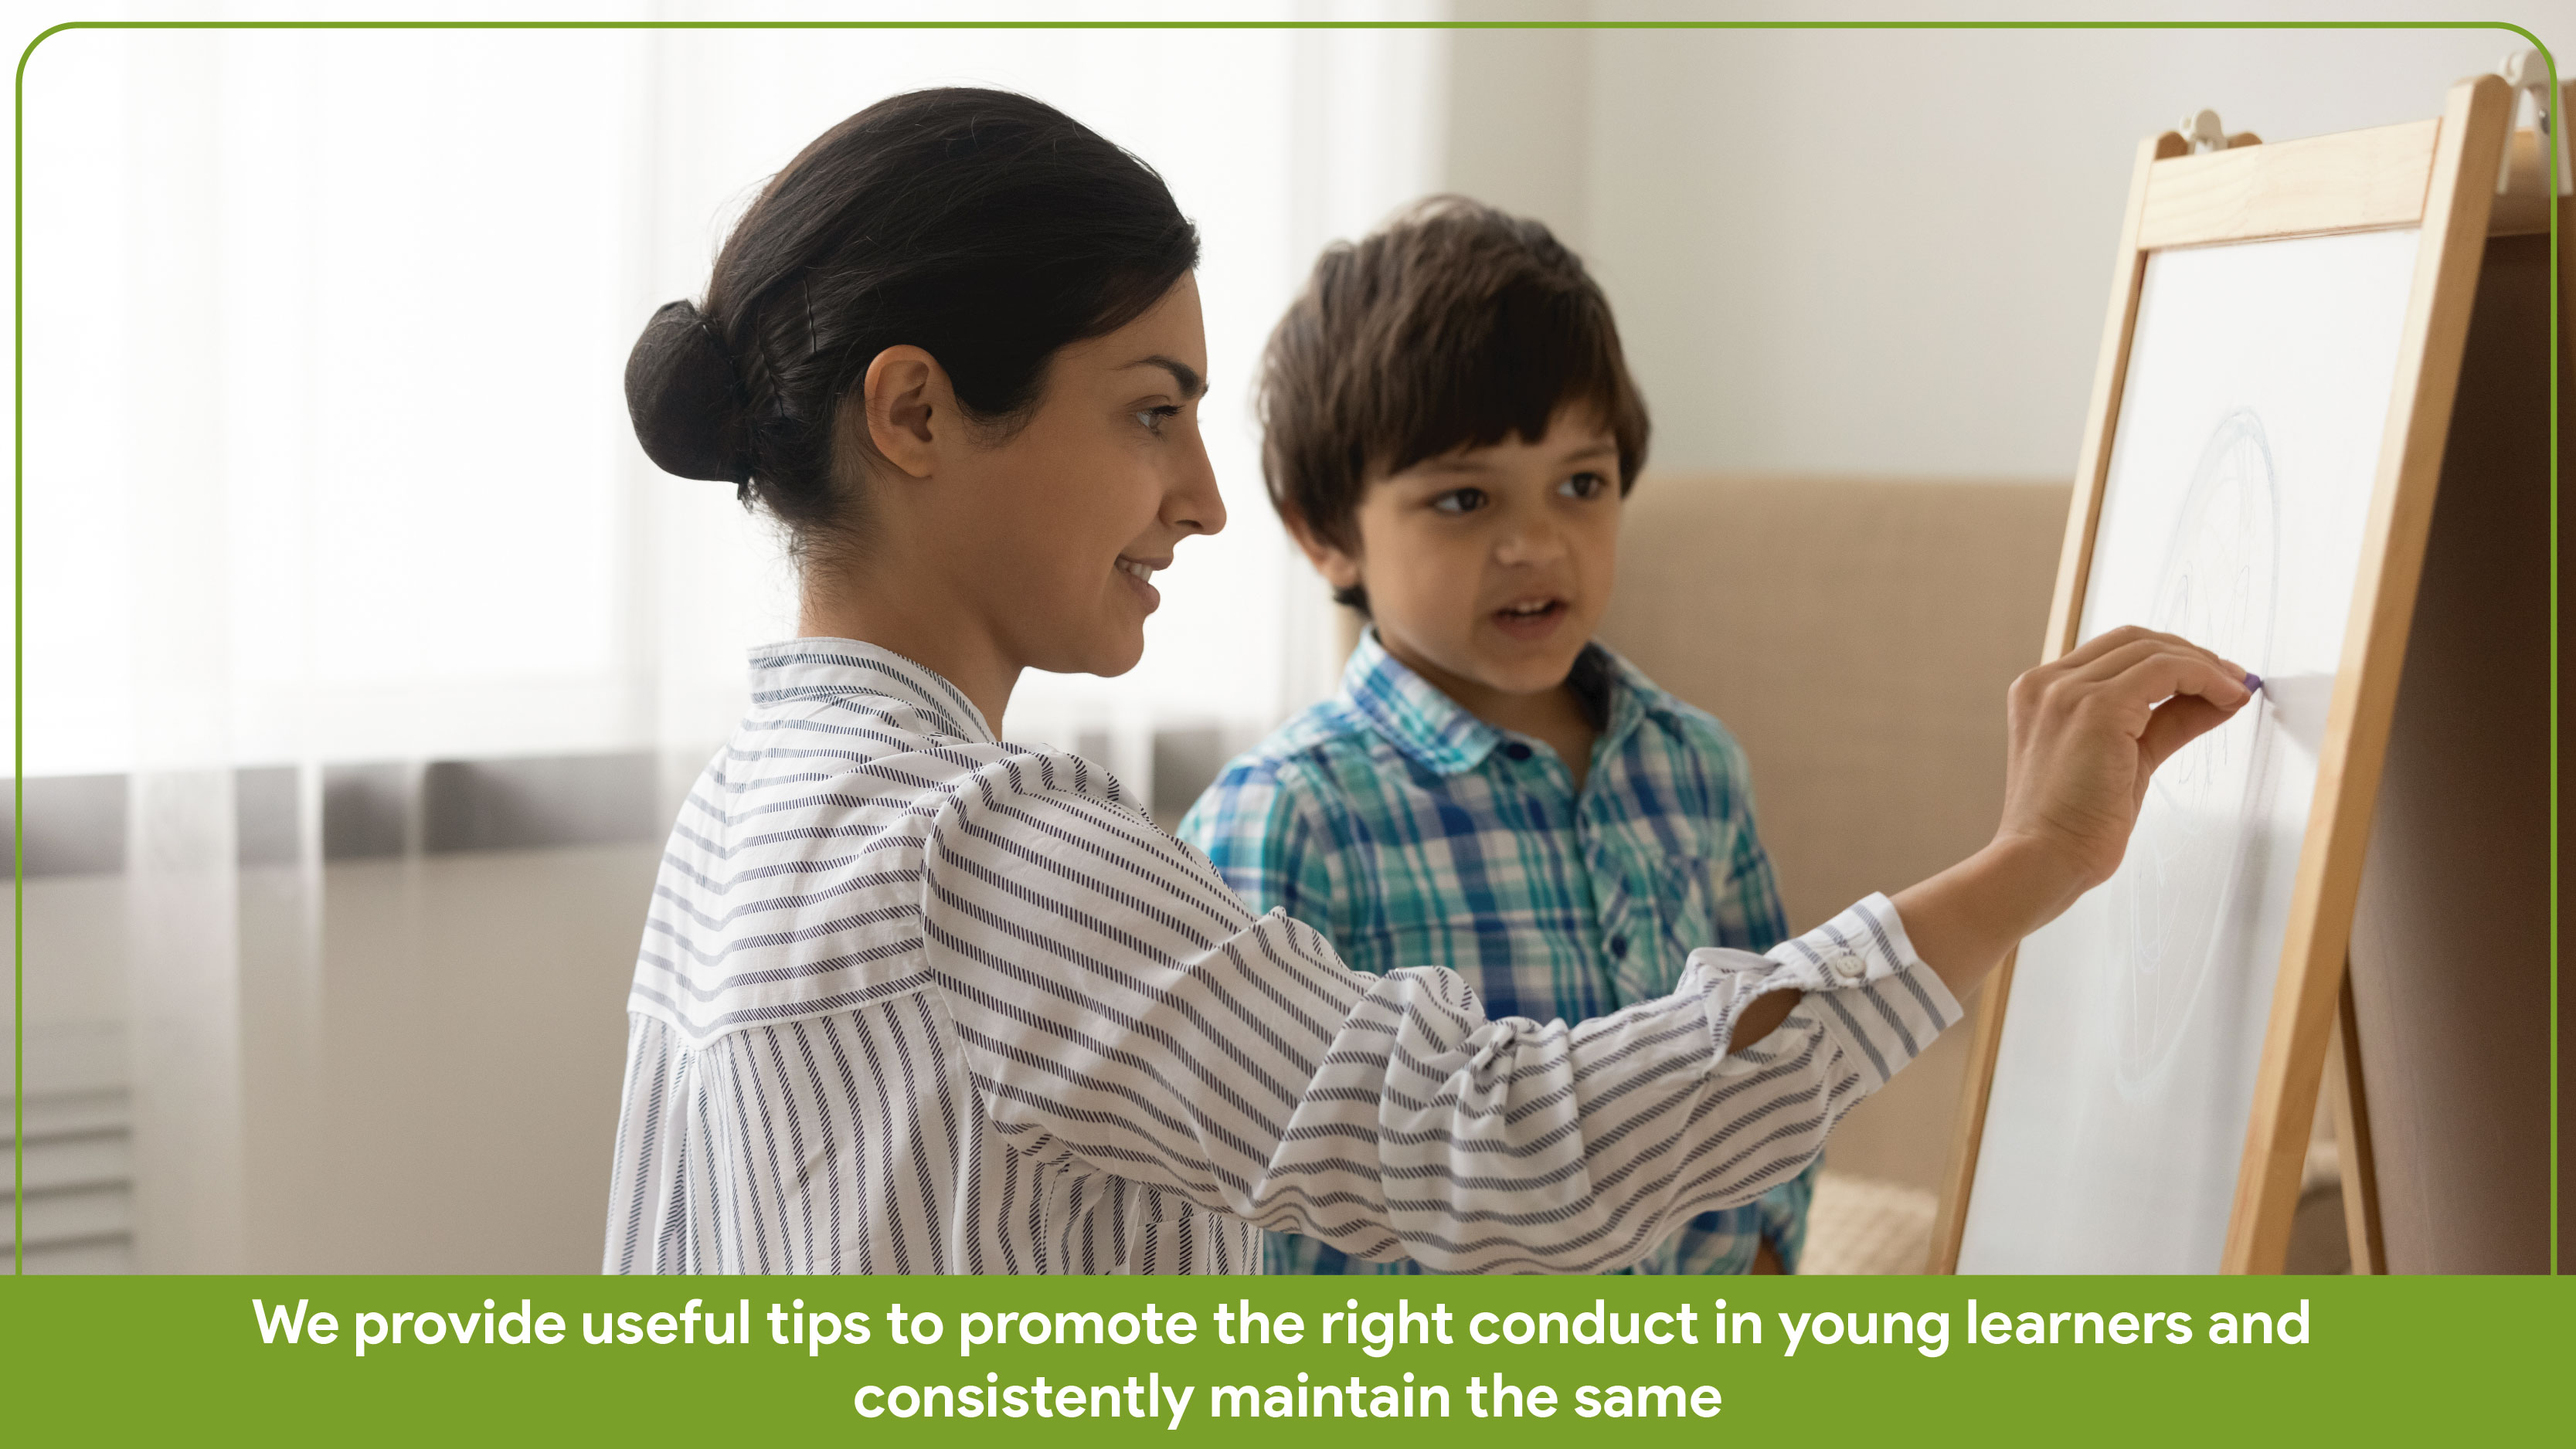 We provide useful tips to promote the right conduct in young learners and consistently maintain the same